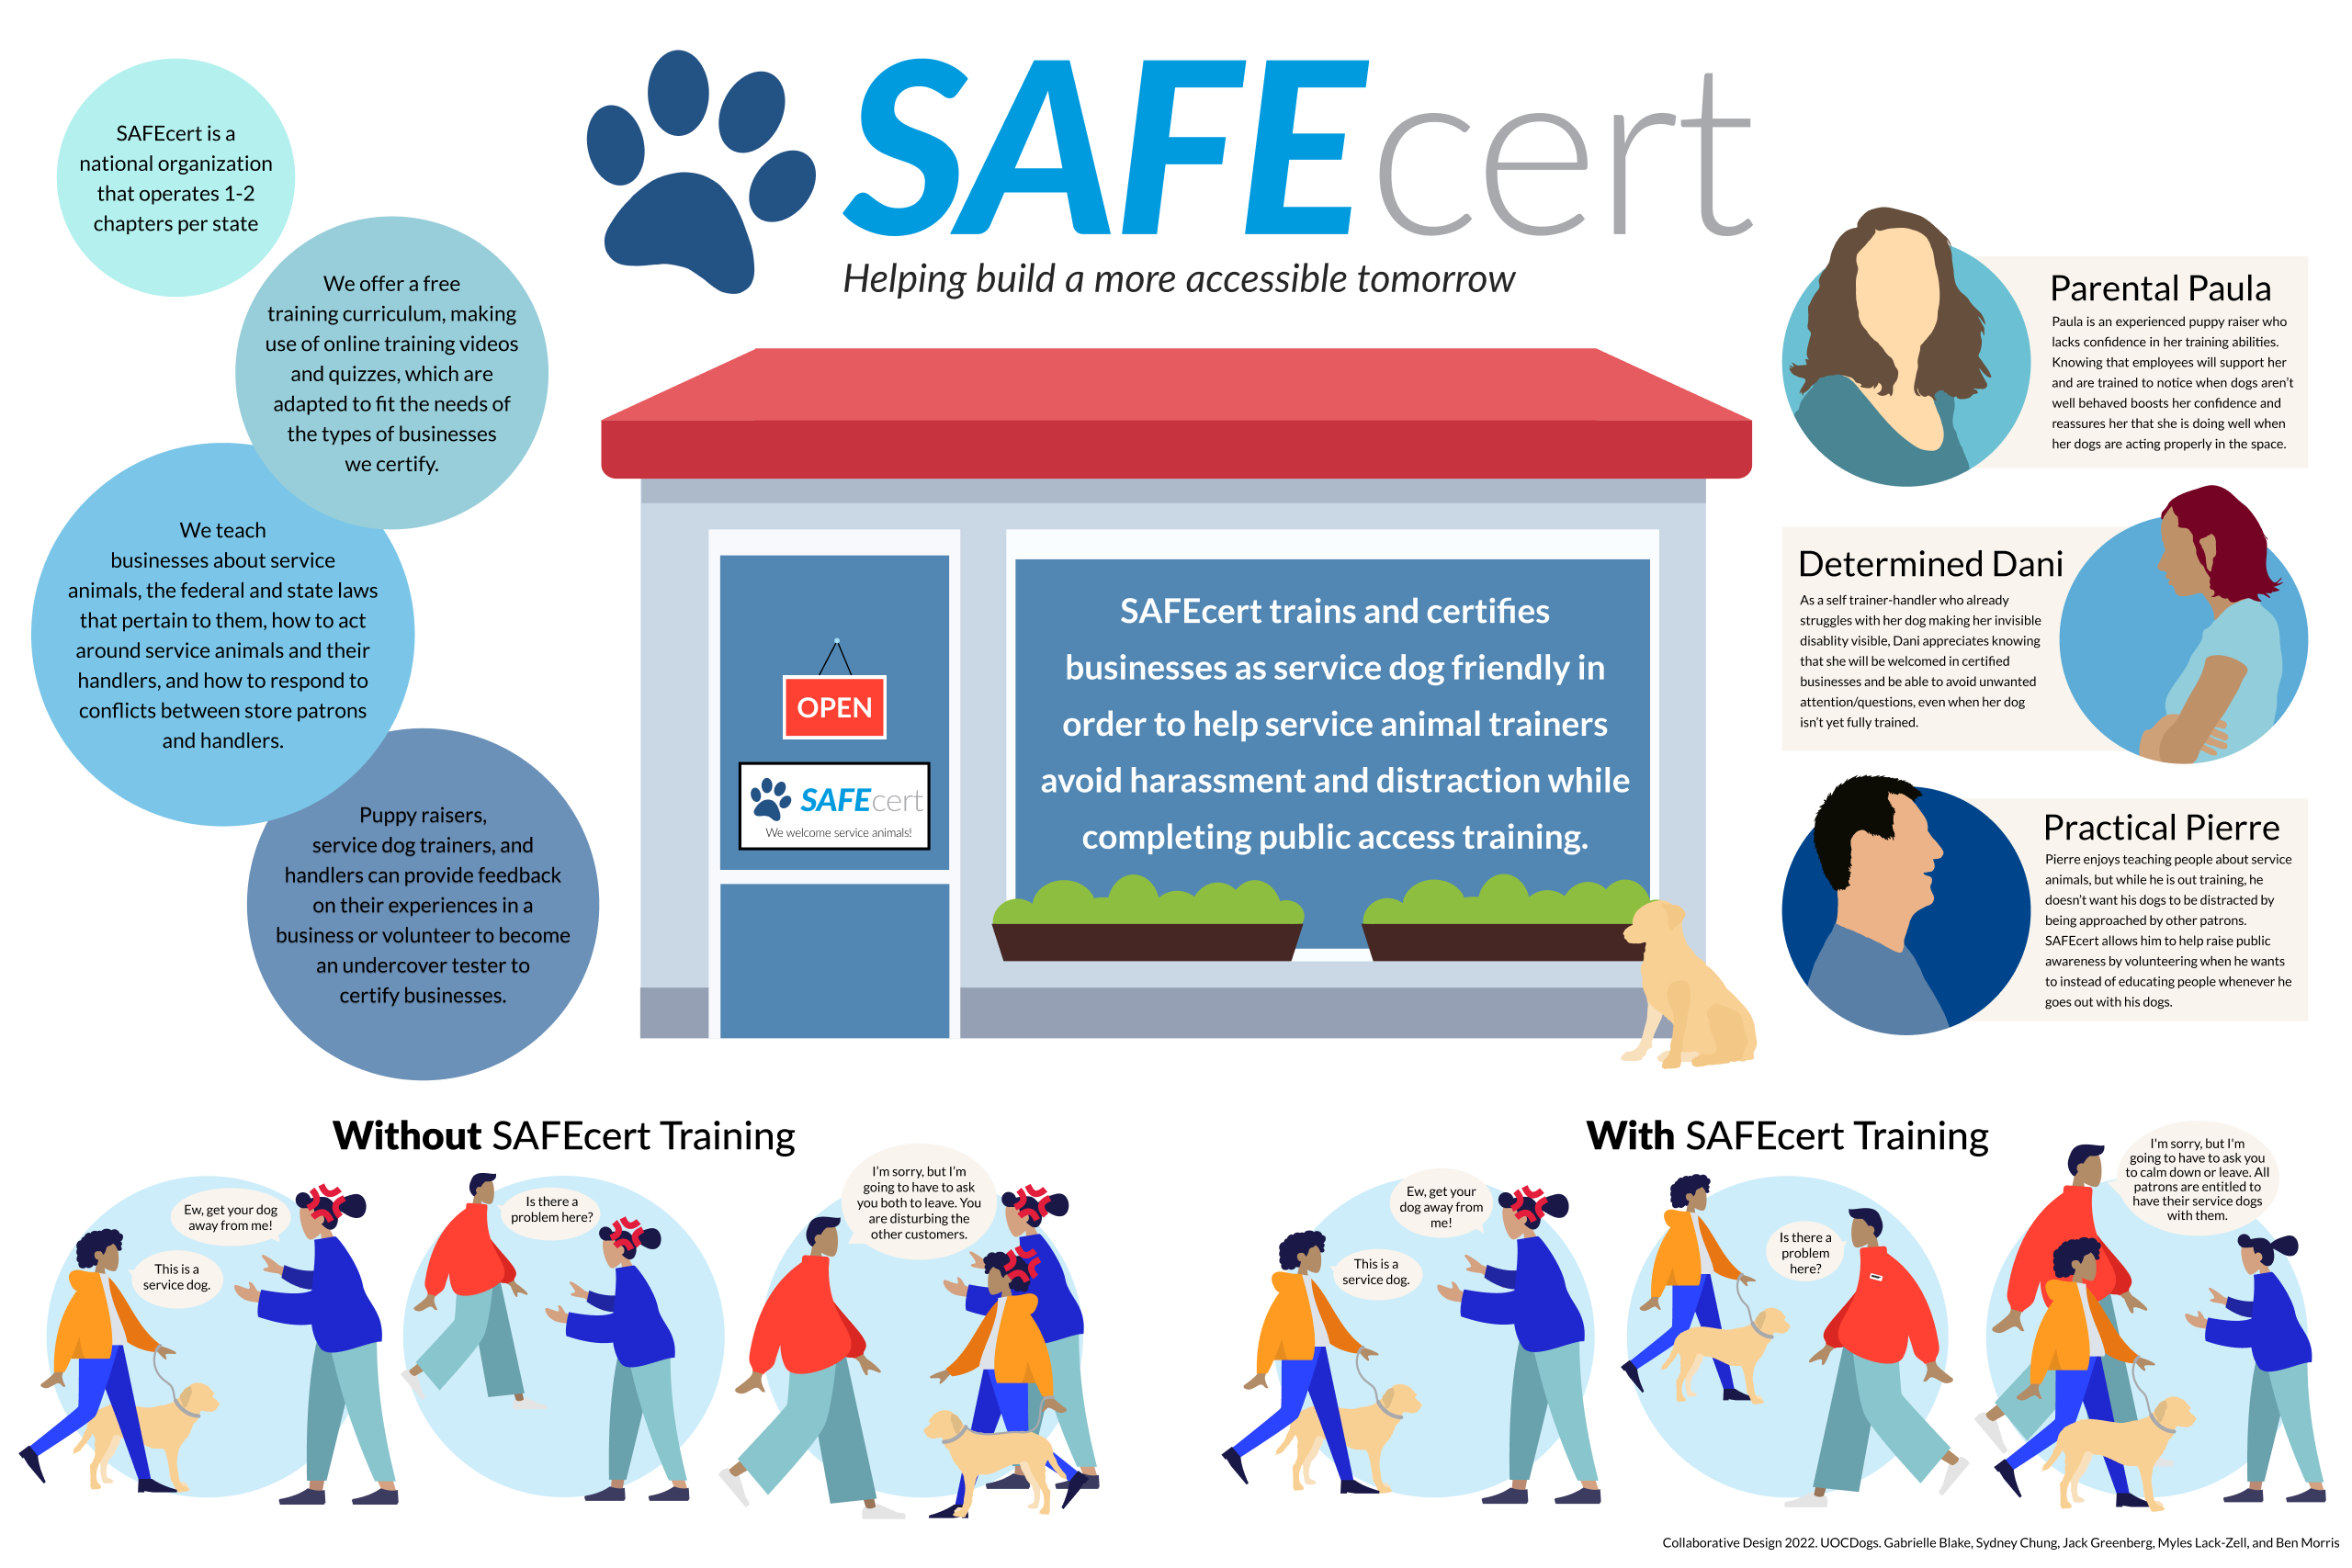 Poster for safecert. Vector graphic of a storefront in the middle, safecert logo on top, comic strip scenarios at the bottom, blue circles with test on the left, and persona graphics on the right